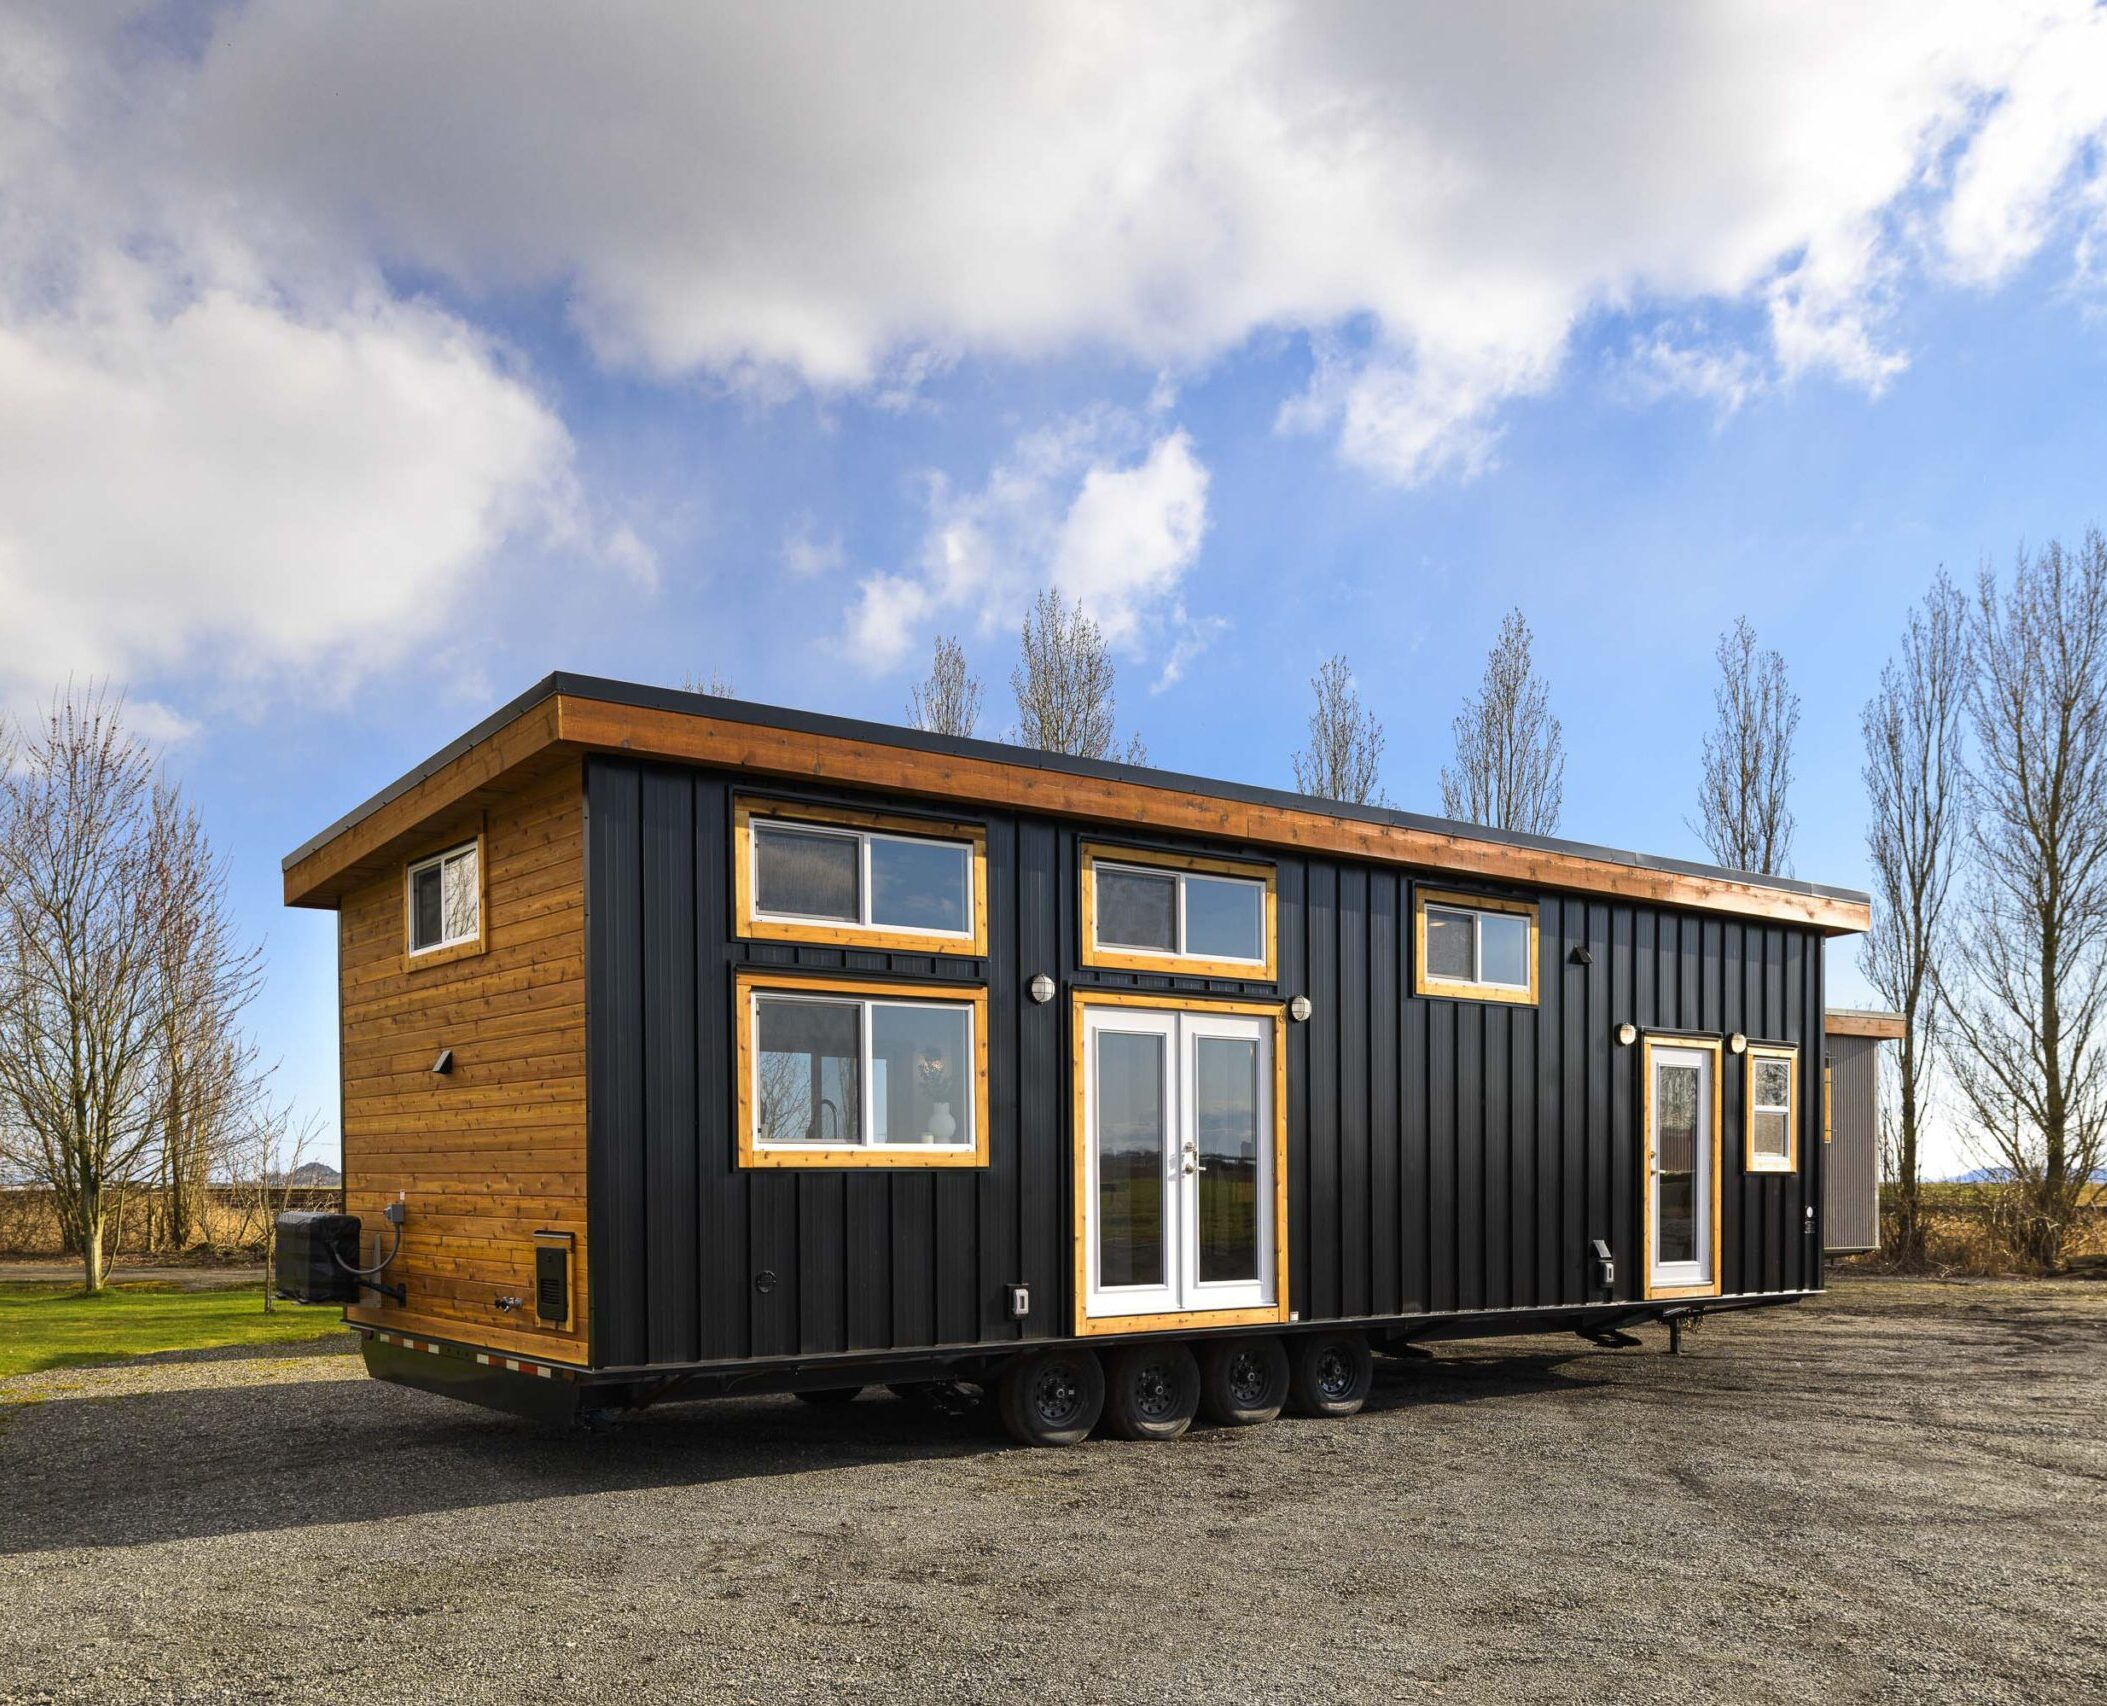 exterior view of affordable tiny home on wheels; dark metal siding and wood trim; park-like setting